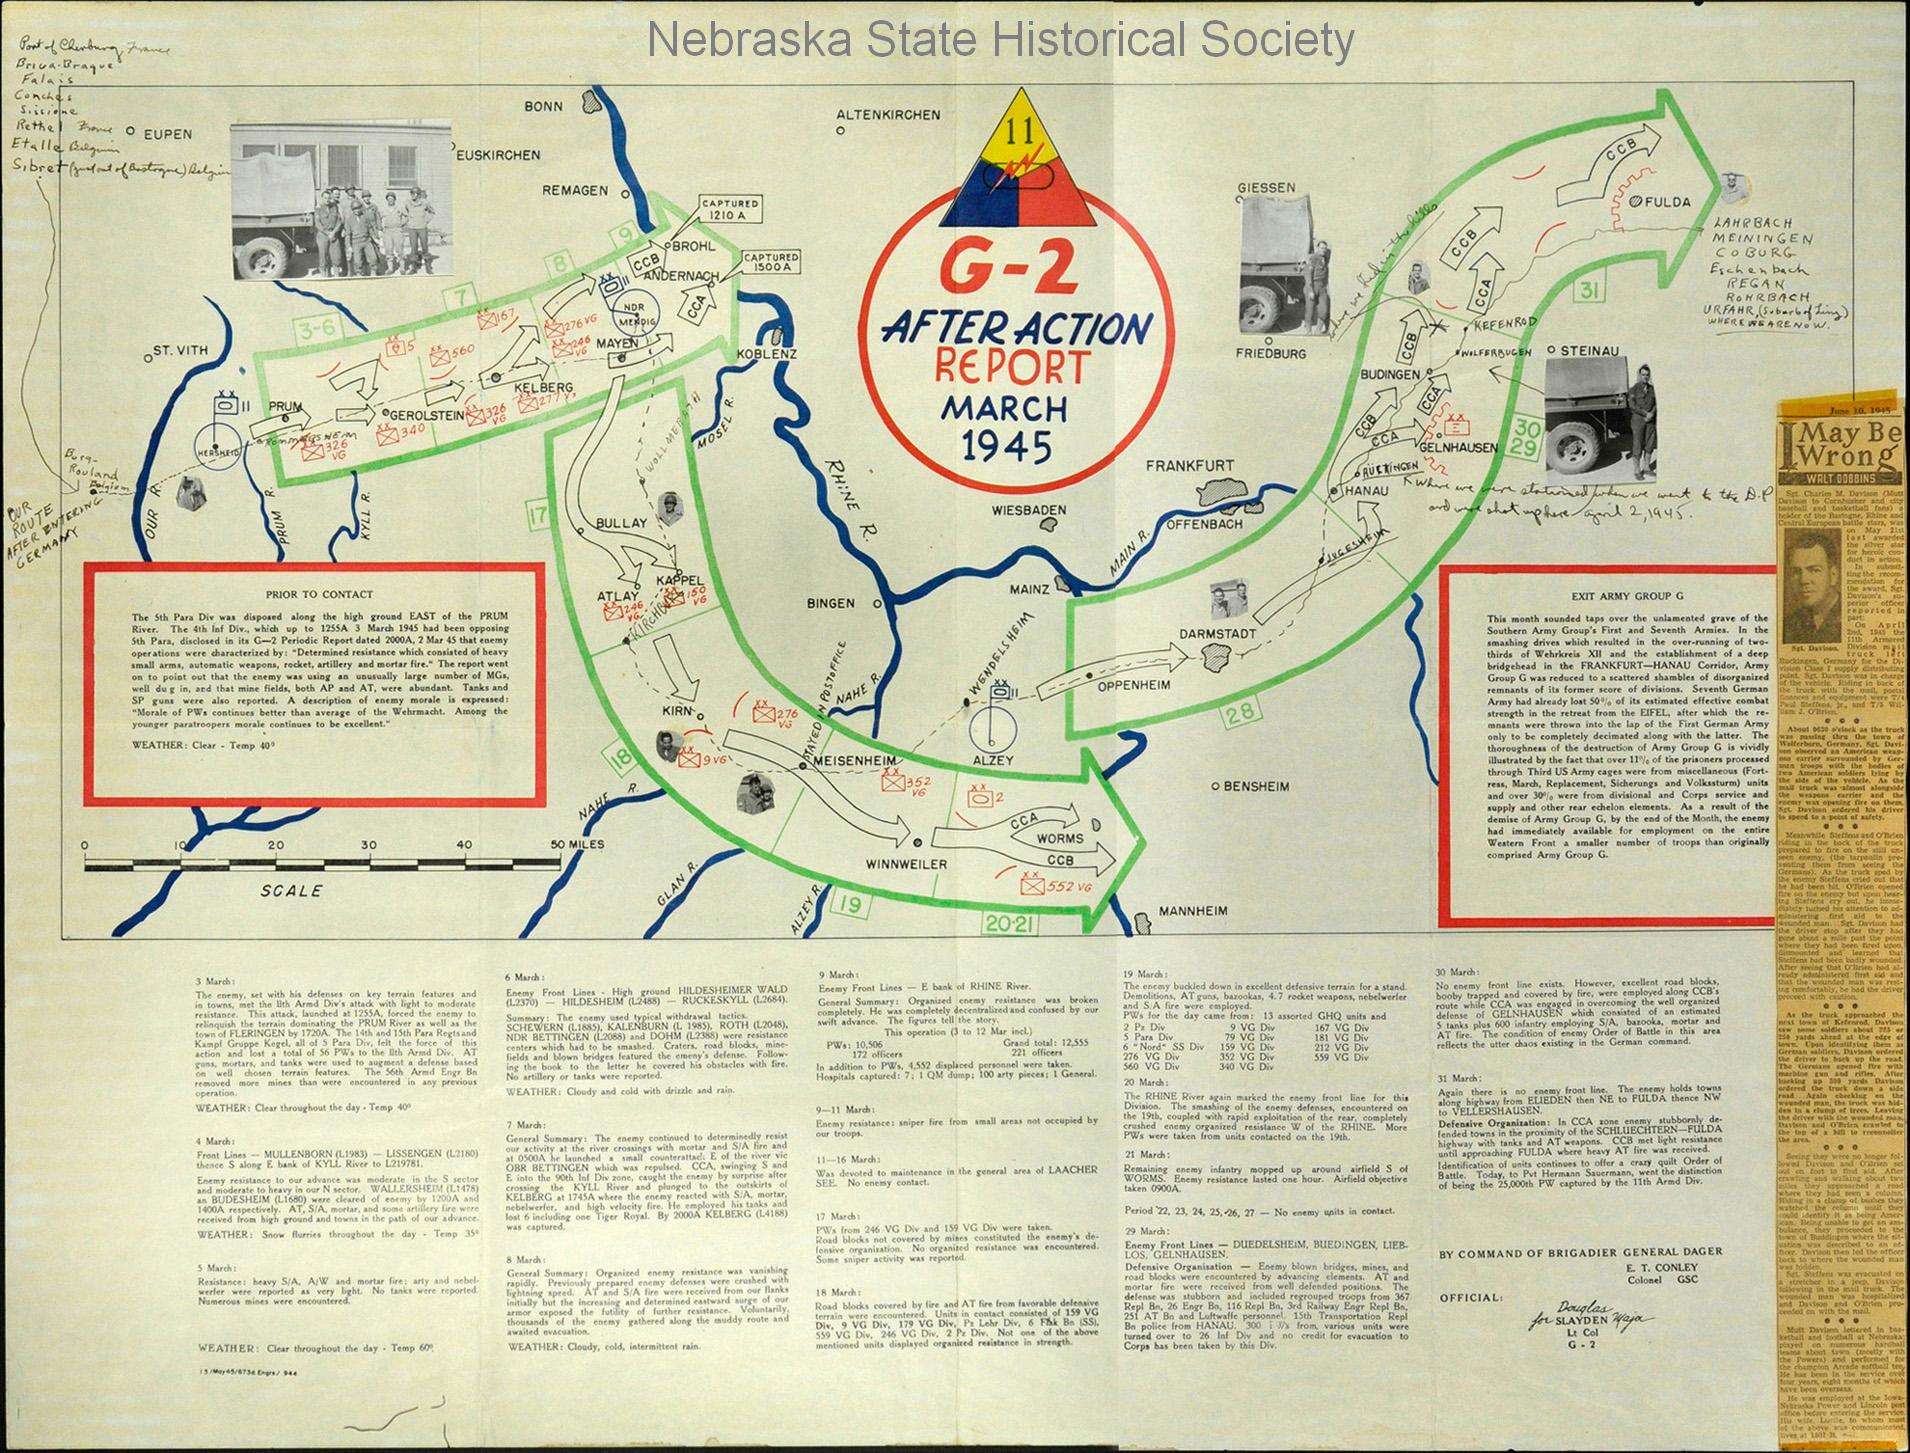 G-2 After Action Report map, March 1945